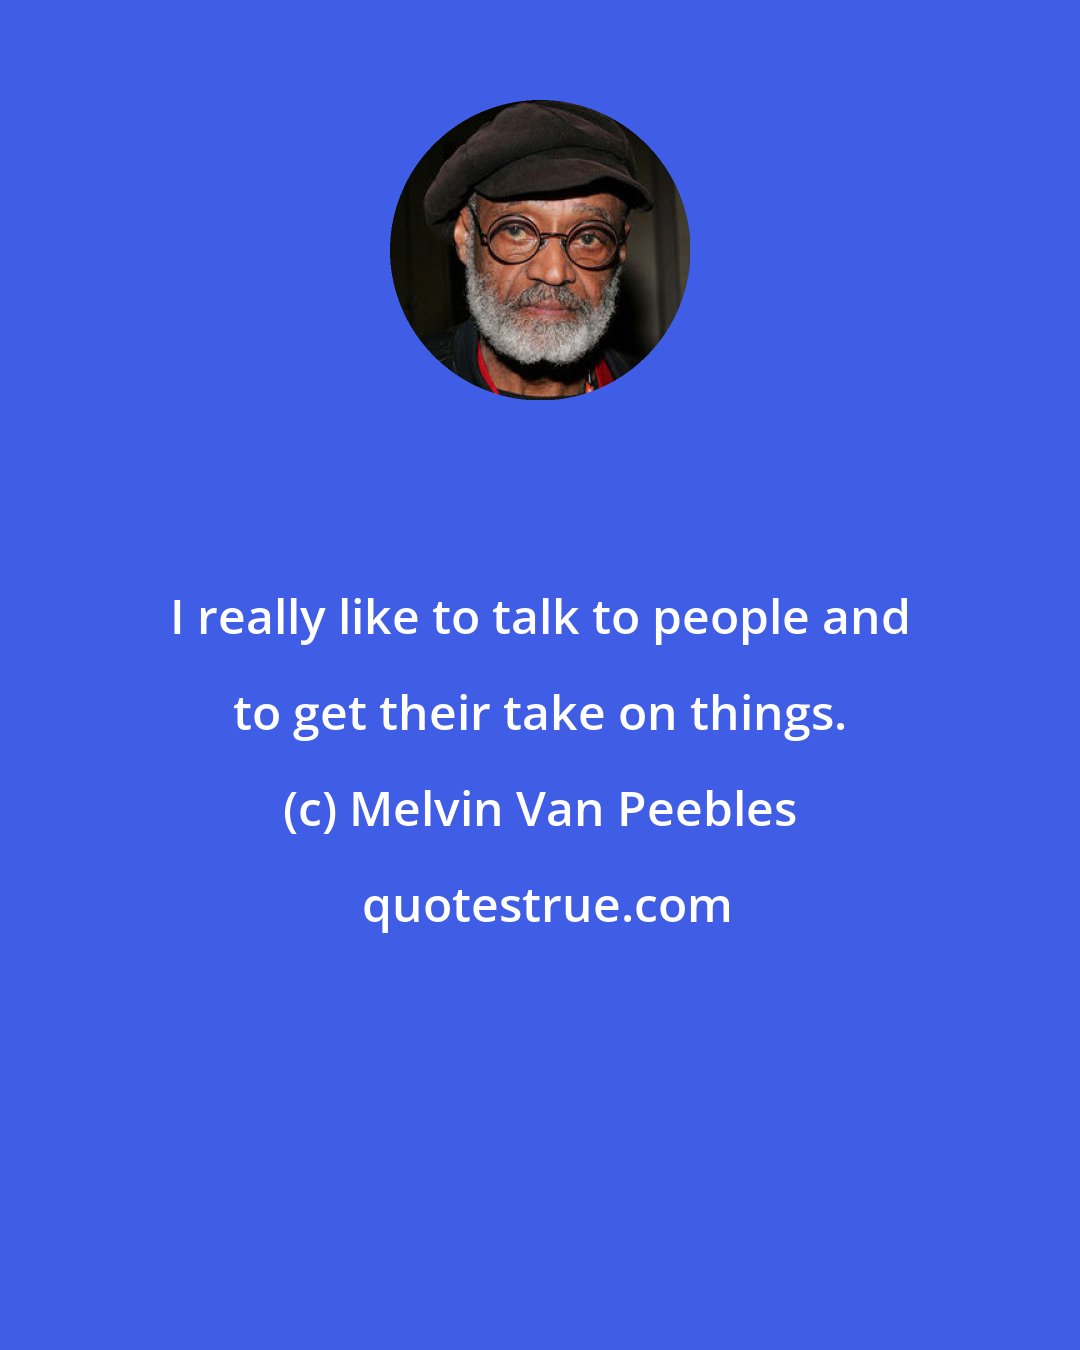 Melvin Van Peebles: I really like to talk to people and to get their take on things.